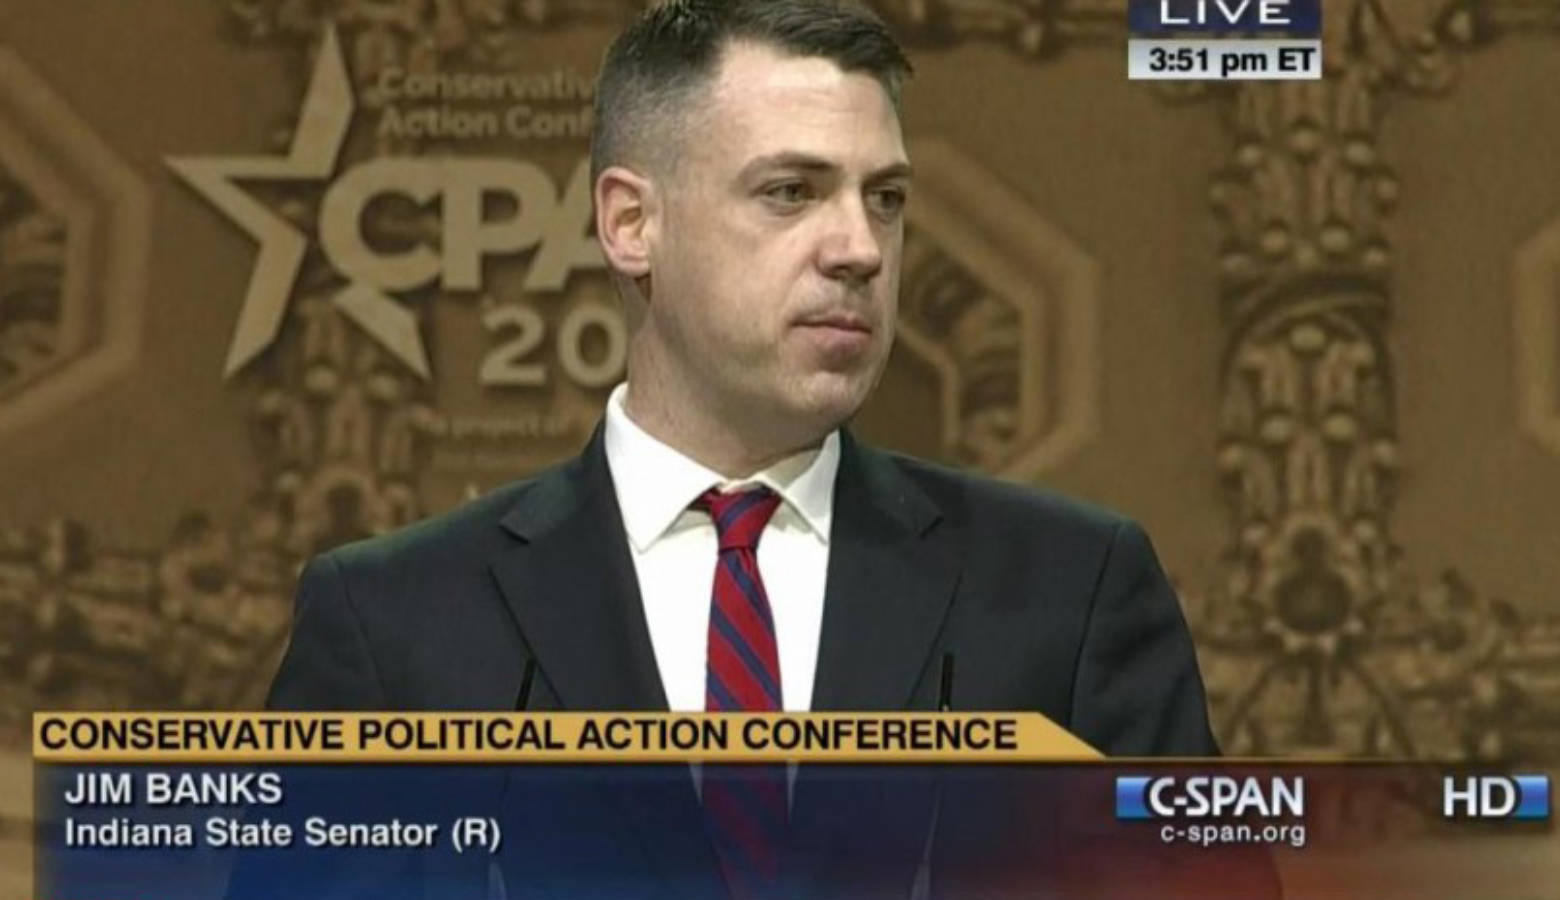 U.S. Congressman Jim Banks, a Republican Representative for Indiana’s 3rd District, is asking U.S. Education Secretary Betsy DeVos to delay changes to the high school diploma in Indiana. (Credit: C-SPAN)